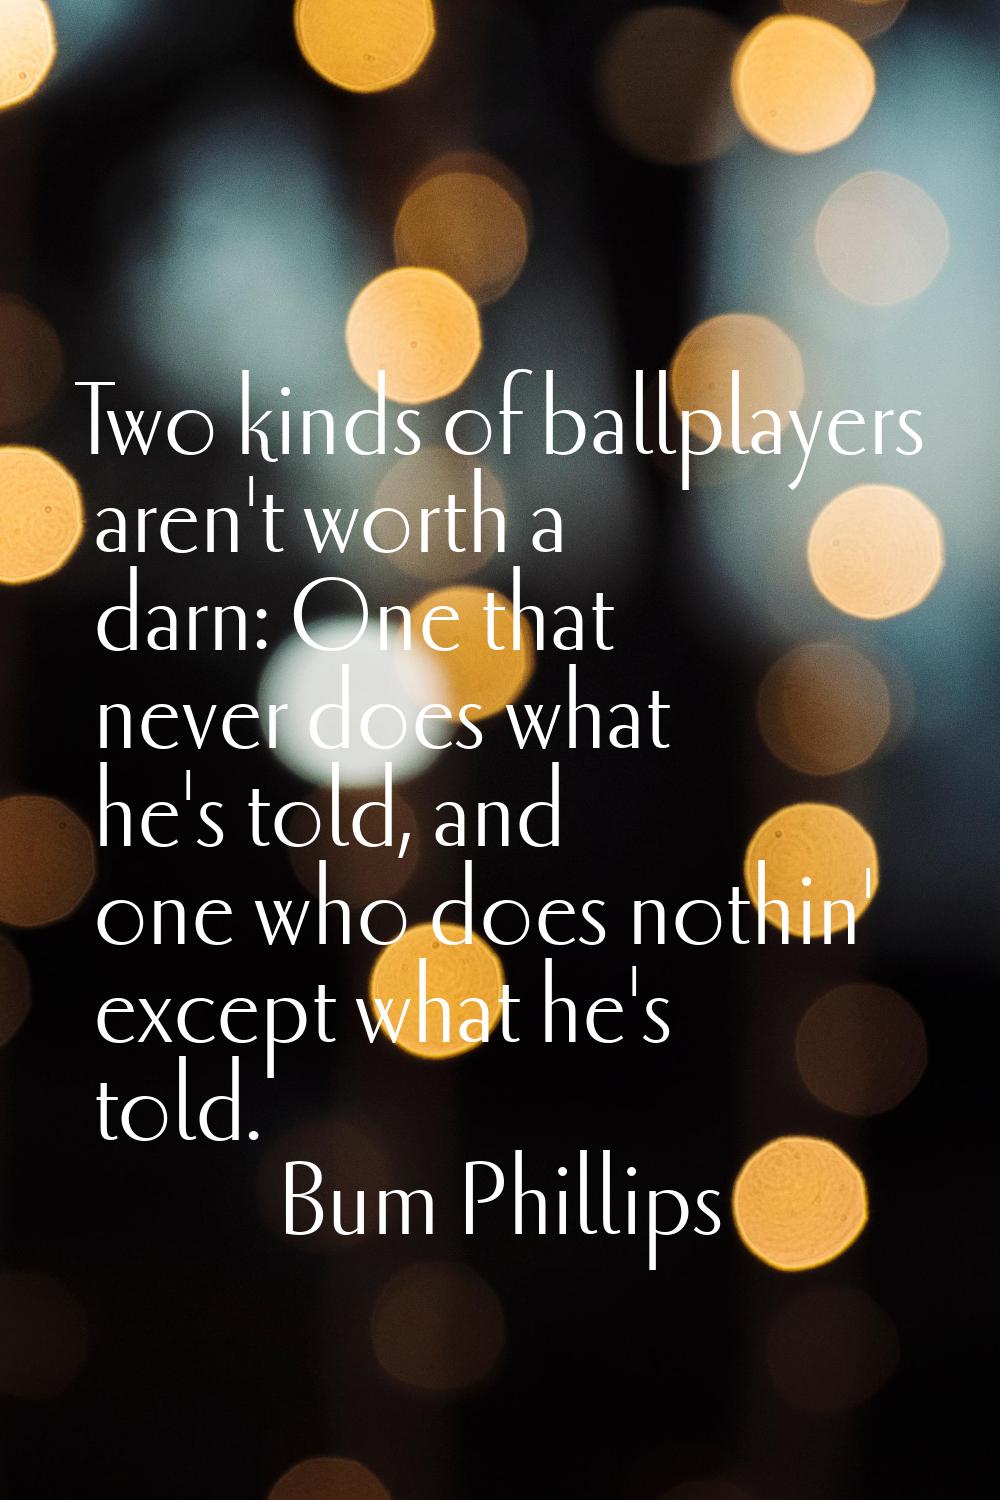 Two kinds of ballplayers aren't worth a darn: One that never does what he's told, and one who does 